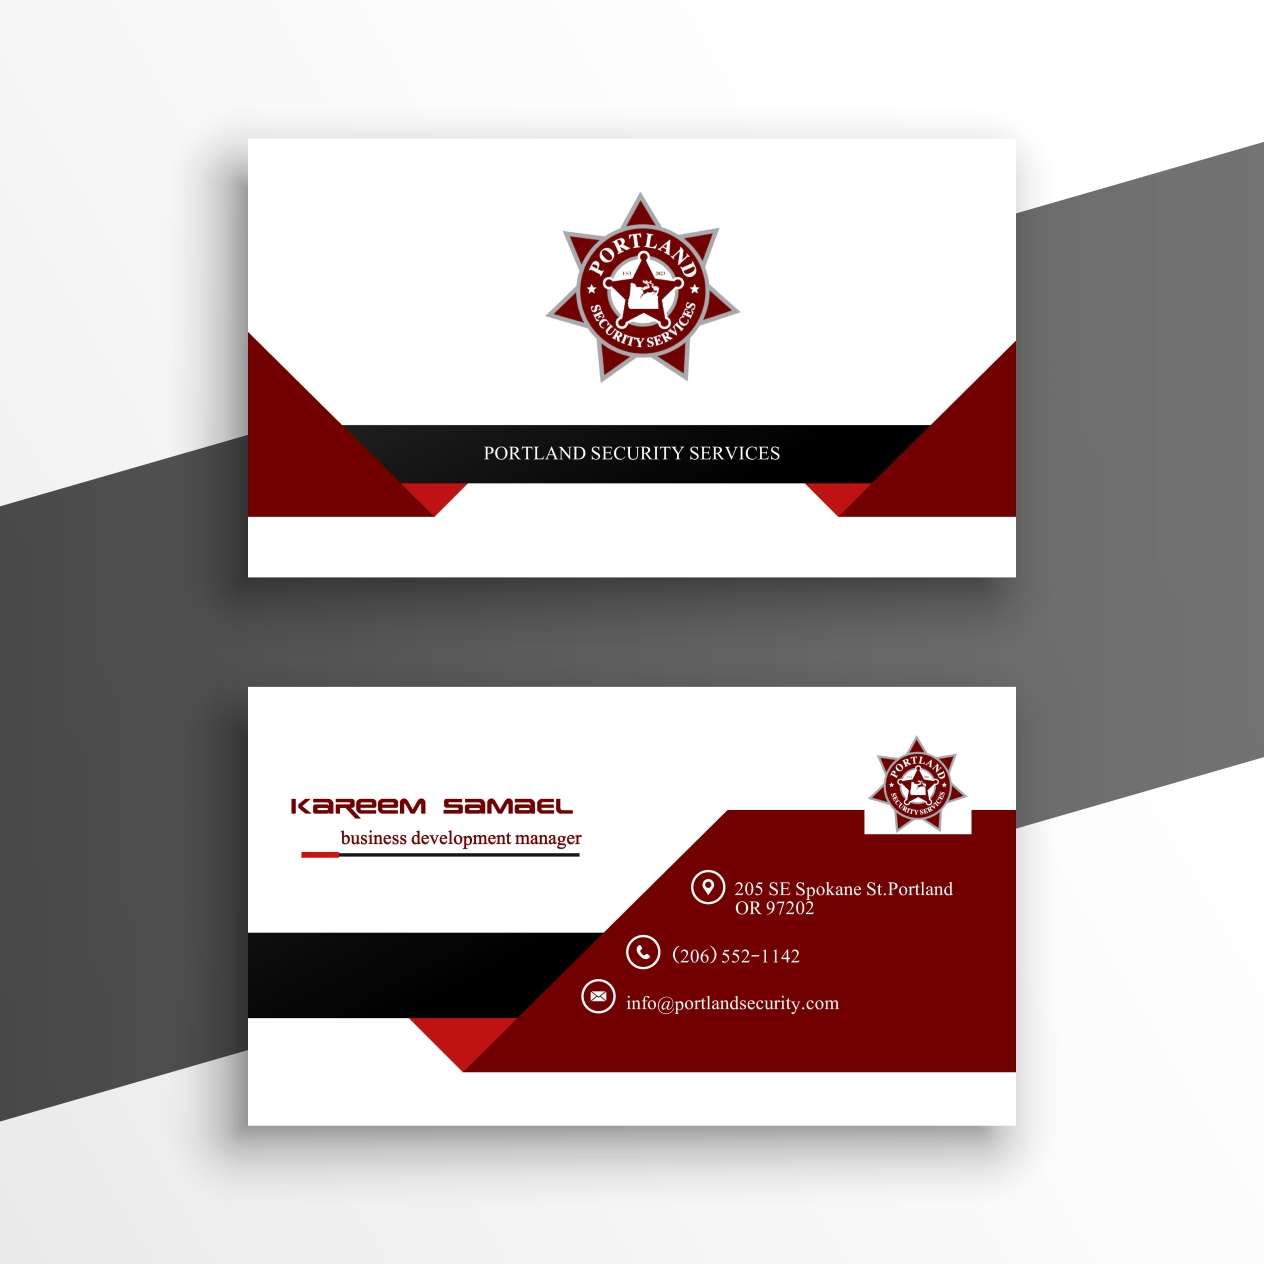 I will design business card.